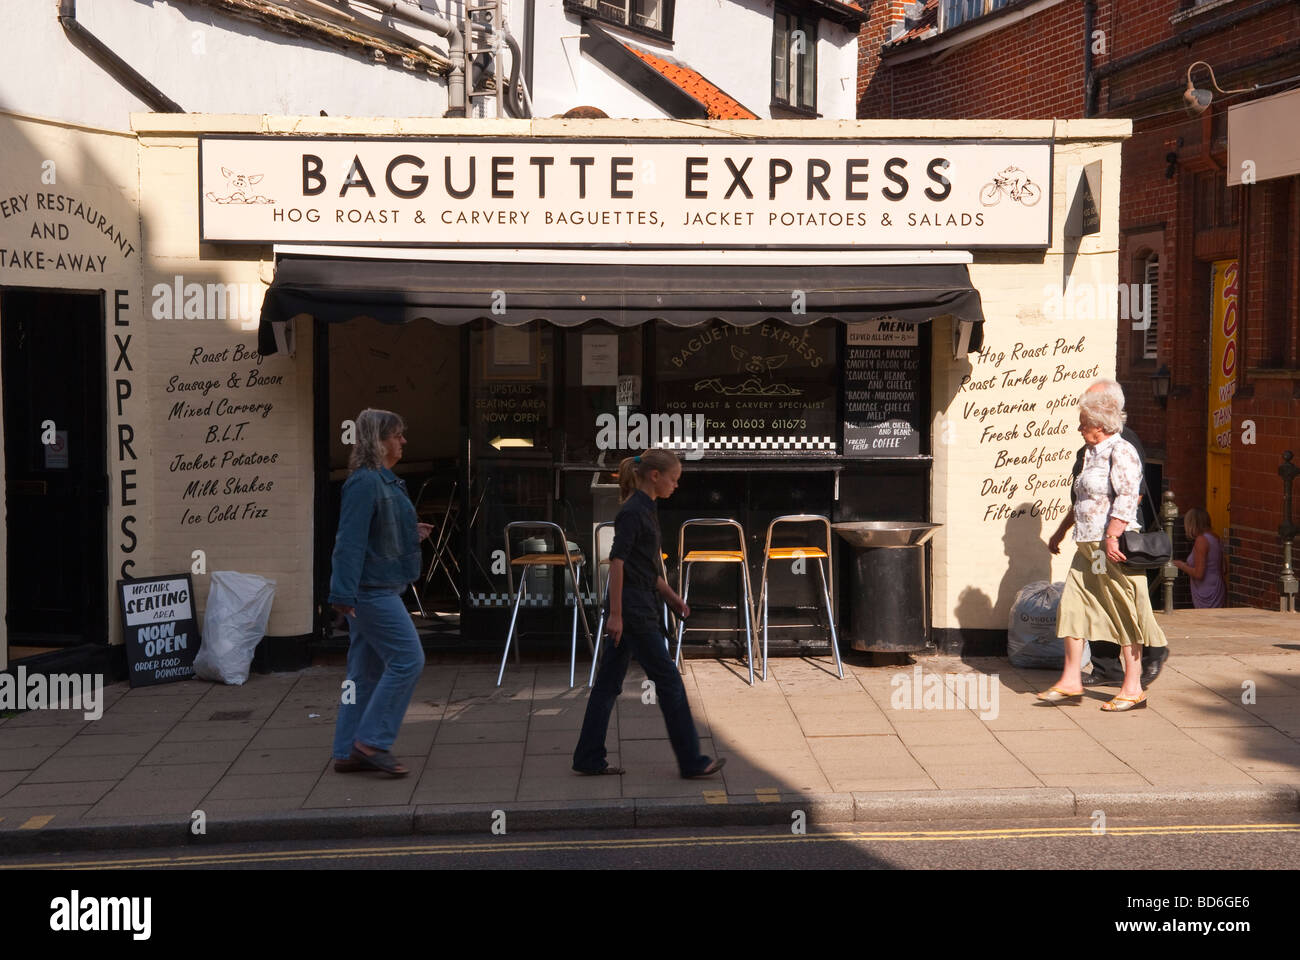 The Baguette Express restaurant and take away shop store in Norwich Norfolk Uk Stock Photo